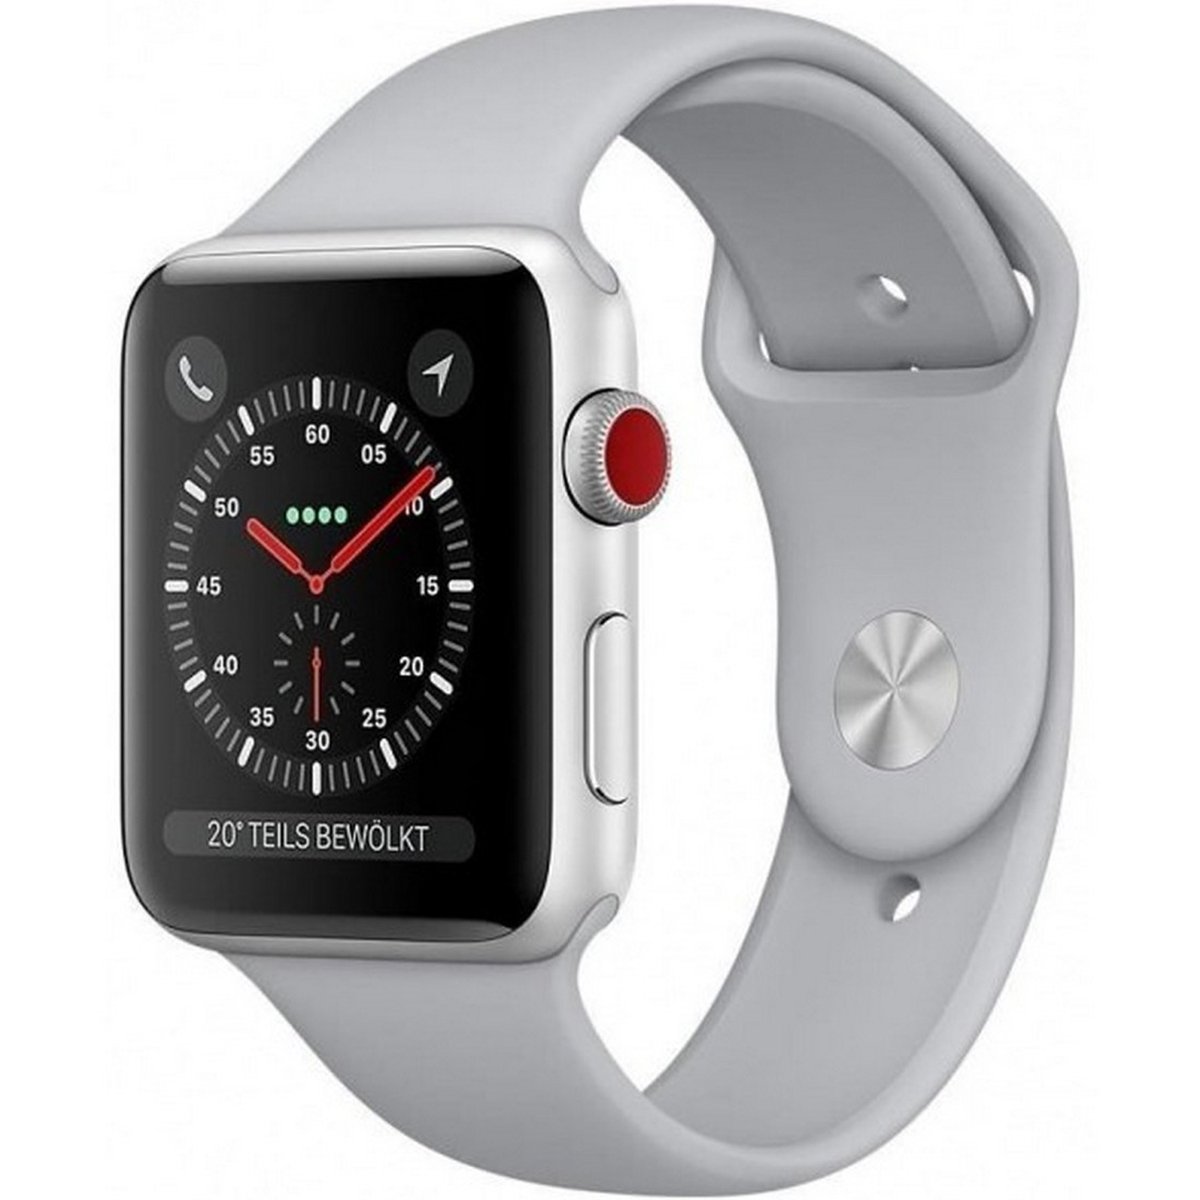 Apple Watch Series 3 (GPS + Cellular) MQKF2 Silver Aluminum Case with Fog Sport Band 38mm